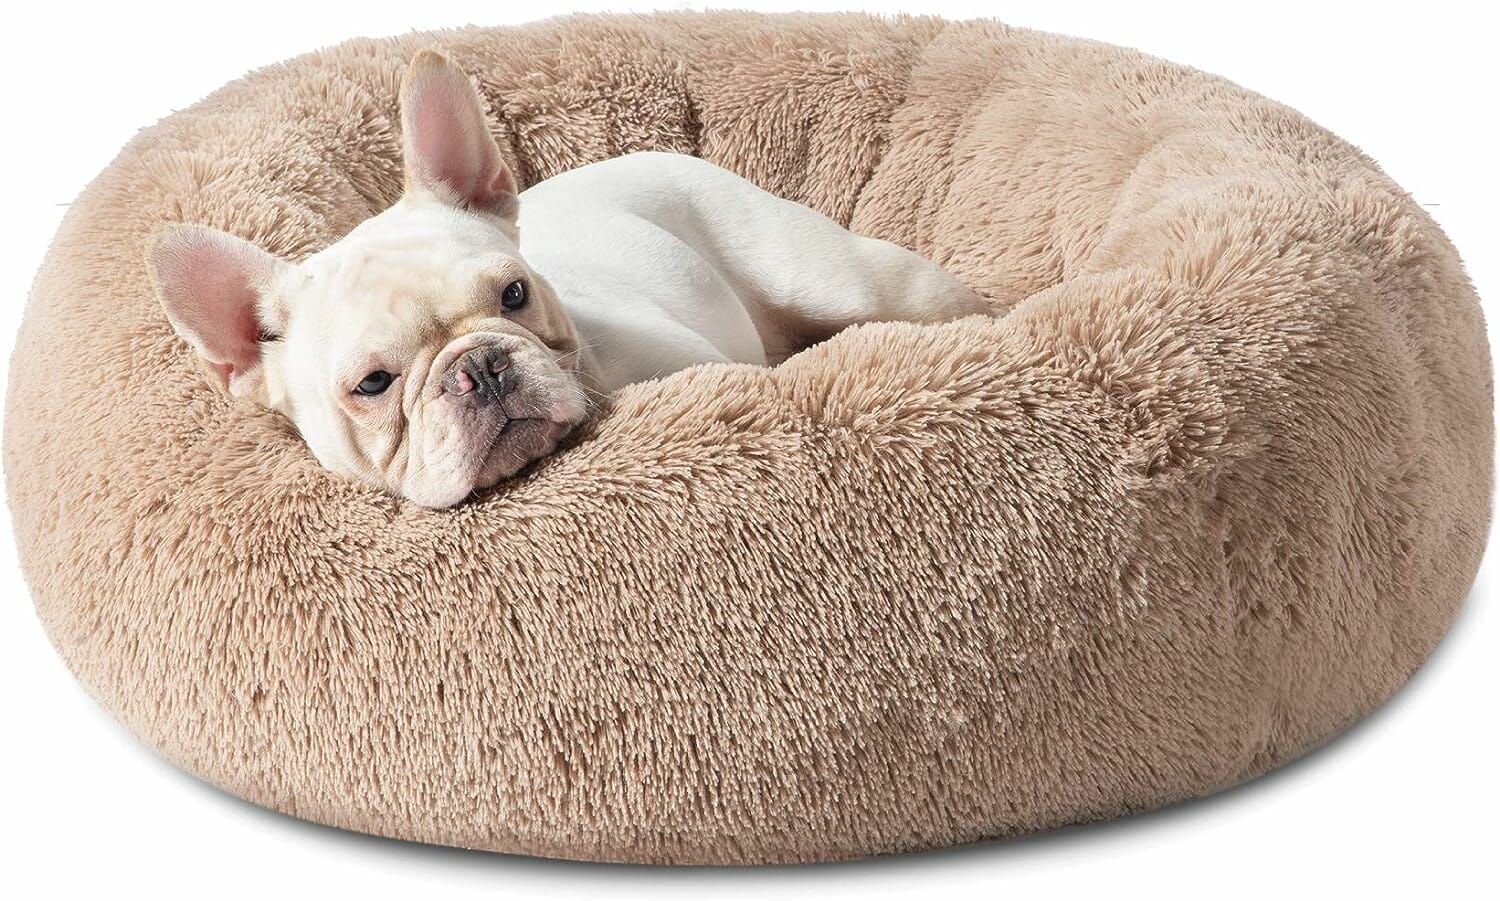 Bedsure Calming Pet Bed Review – Perfect Rest for Your Pet?